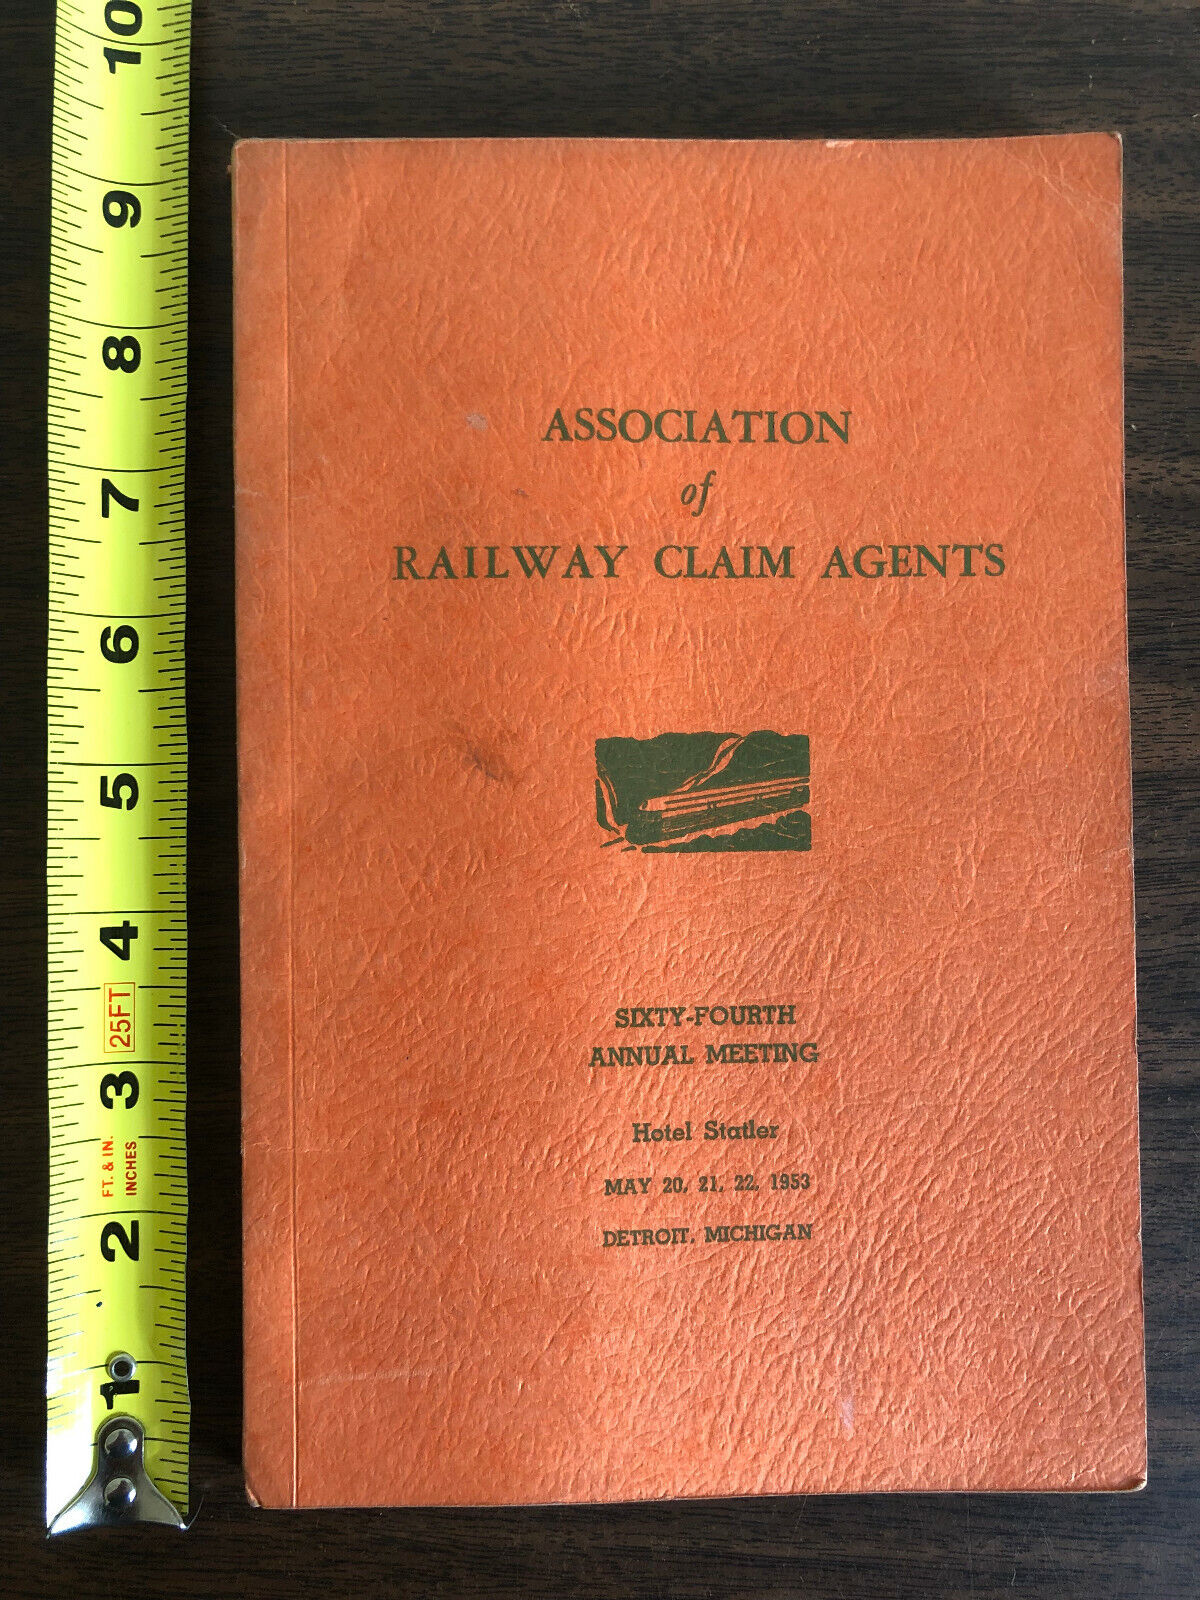 1953 64th Annual Convention Association of Railway Claim Agents Detroit Michigan